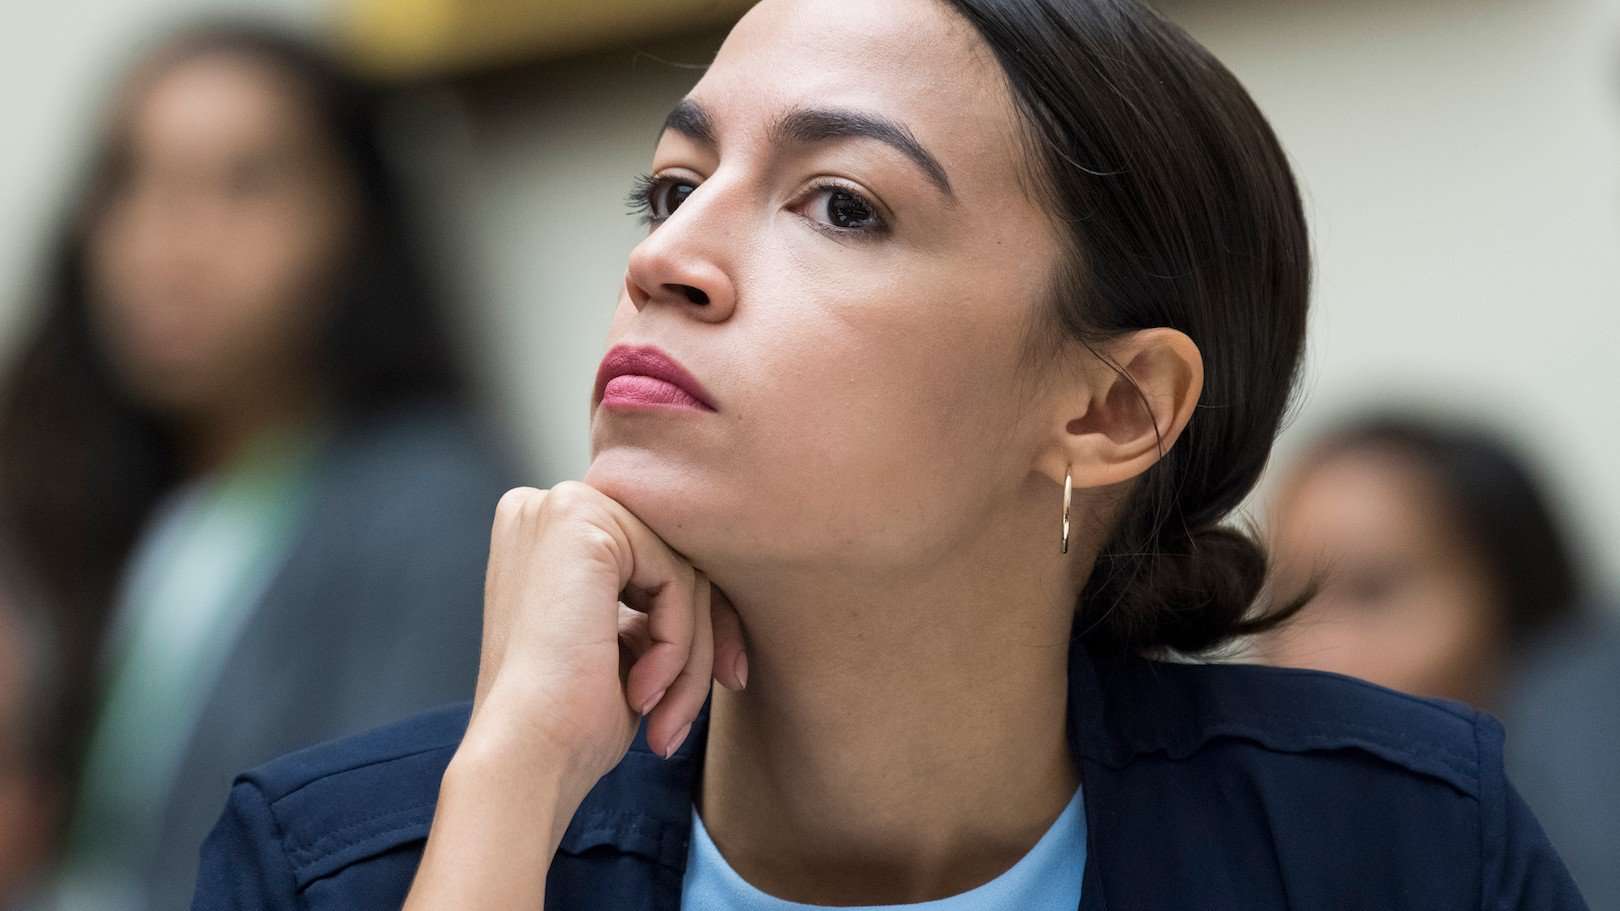 image for The Cop Who Said AOC “Needs A Round” Just Got Fired